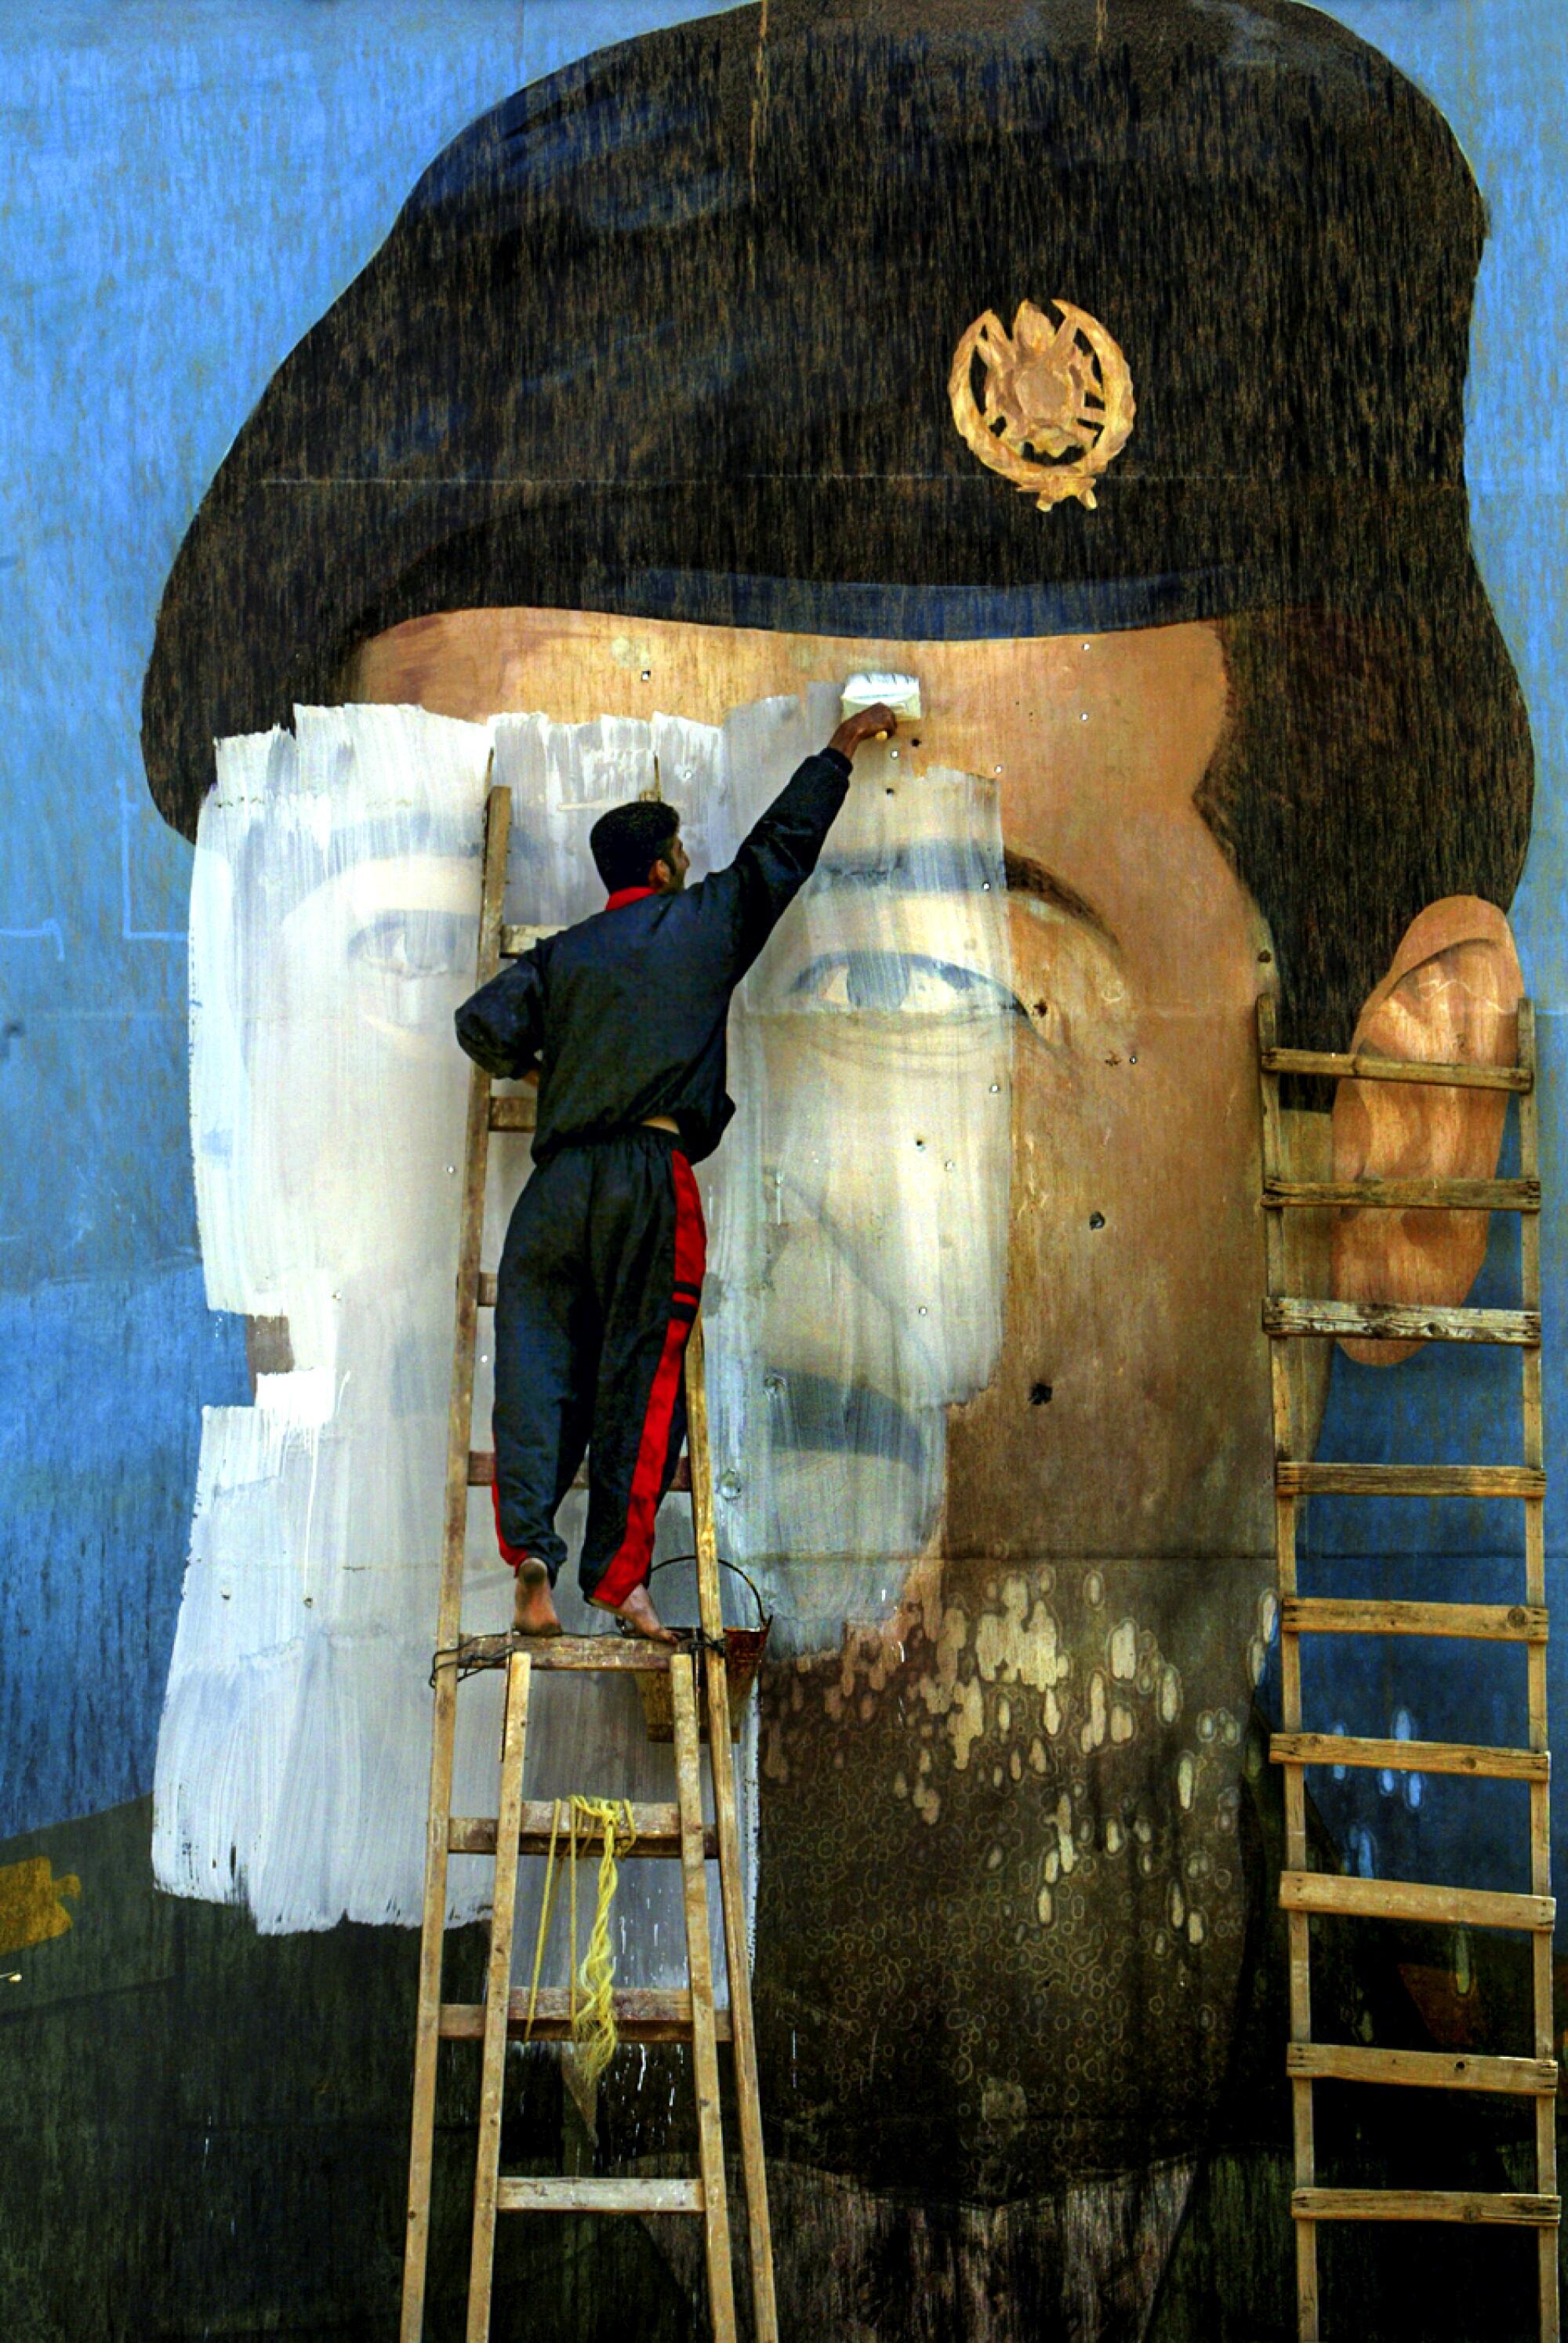 A mural of the face of Saddam Hussein is painted over by Salem Yuel at what was once a Fedayeen training camp in Baghdad.